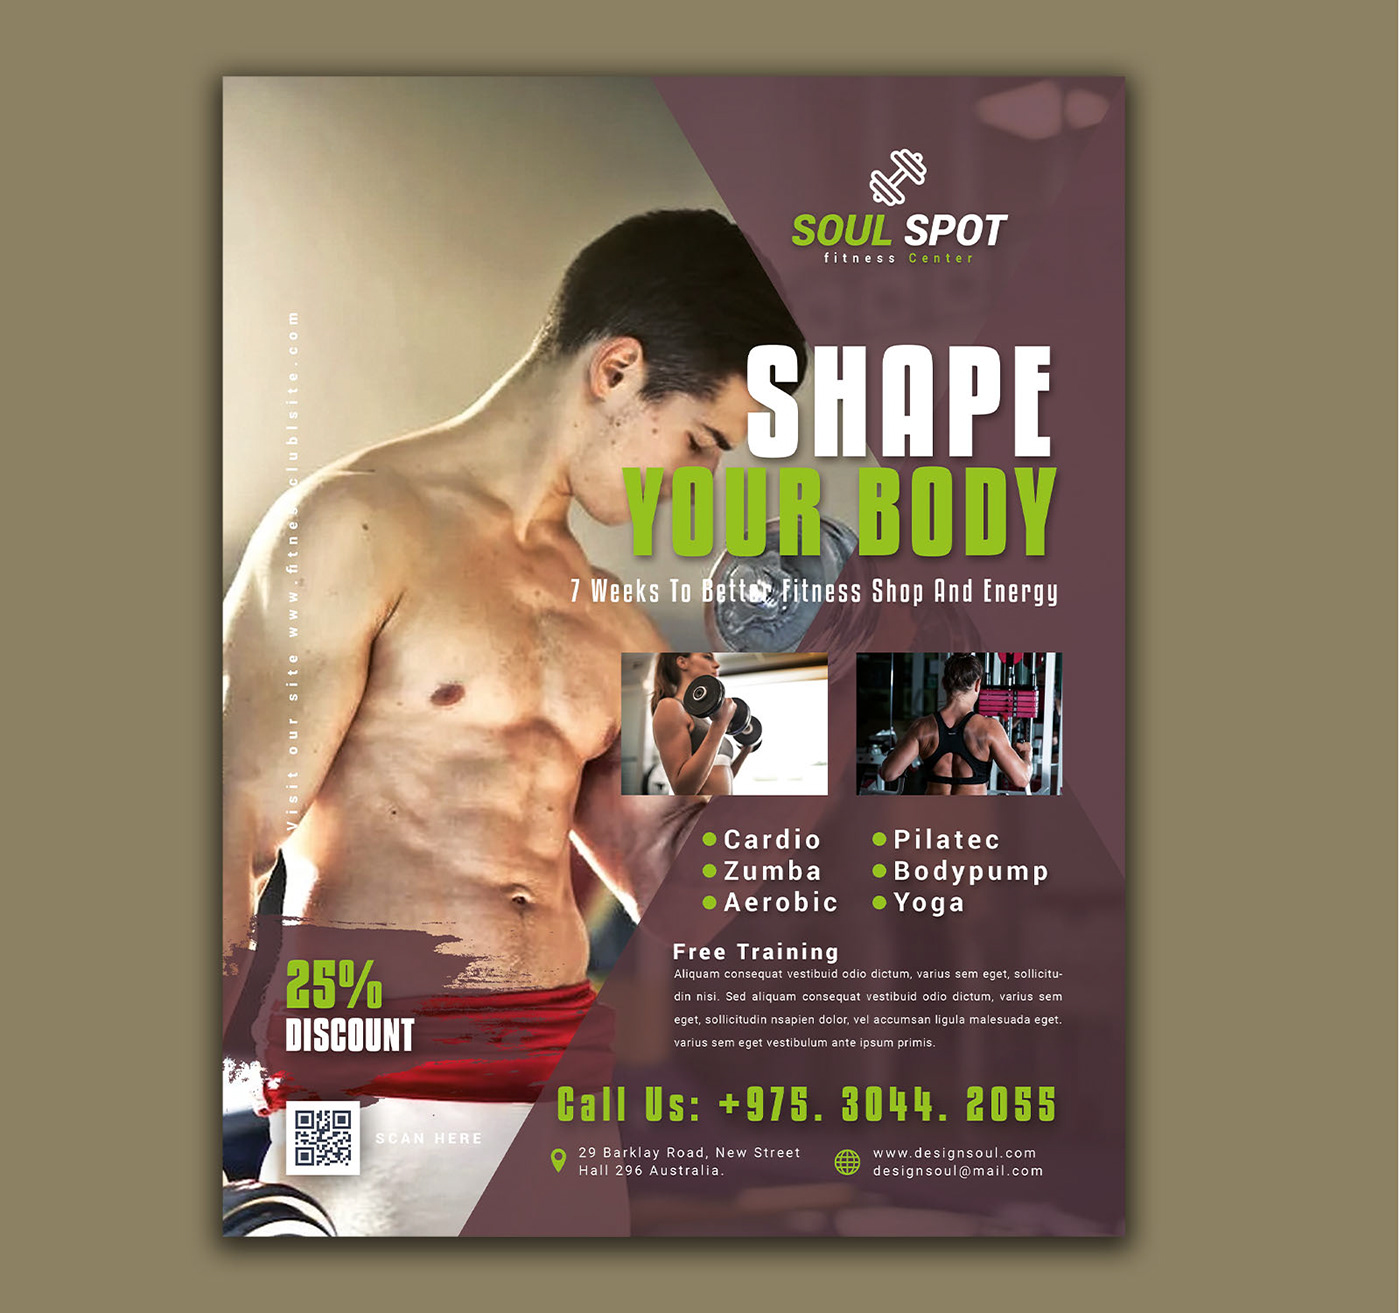 gym banner bodybuilder healthy fitness fitness banner BodyBuilding Fitness Gym sport Promotion shape your body